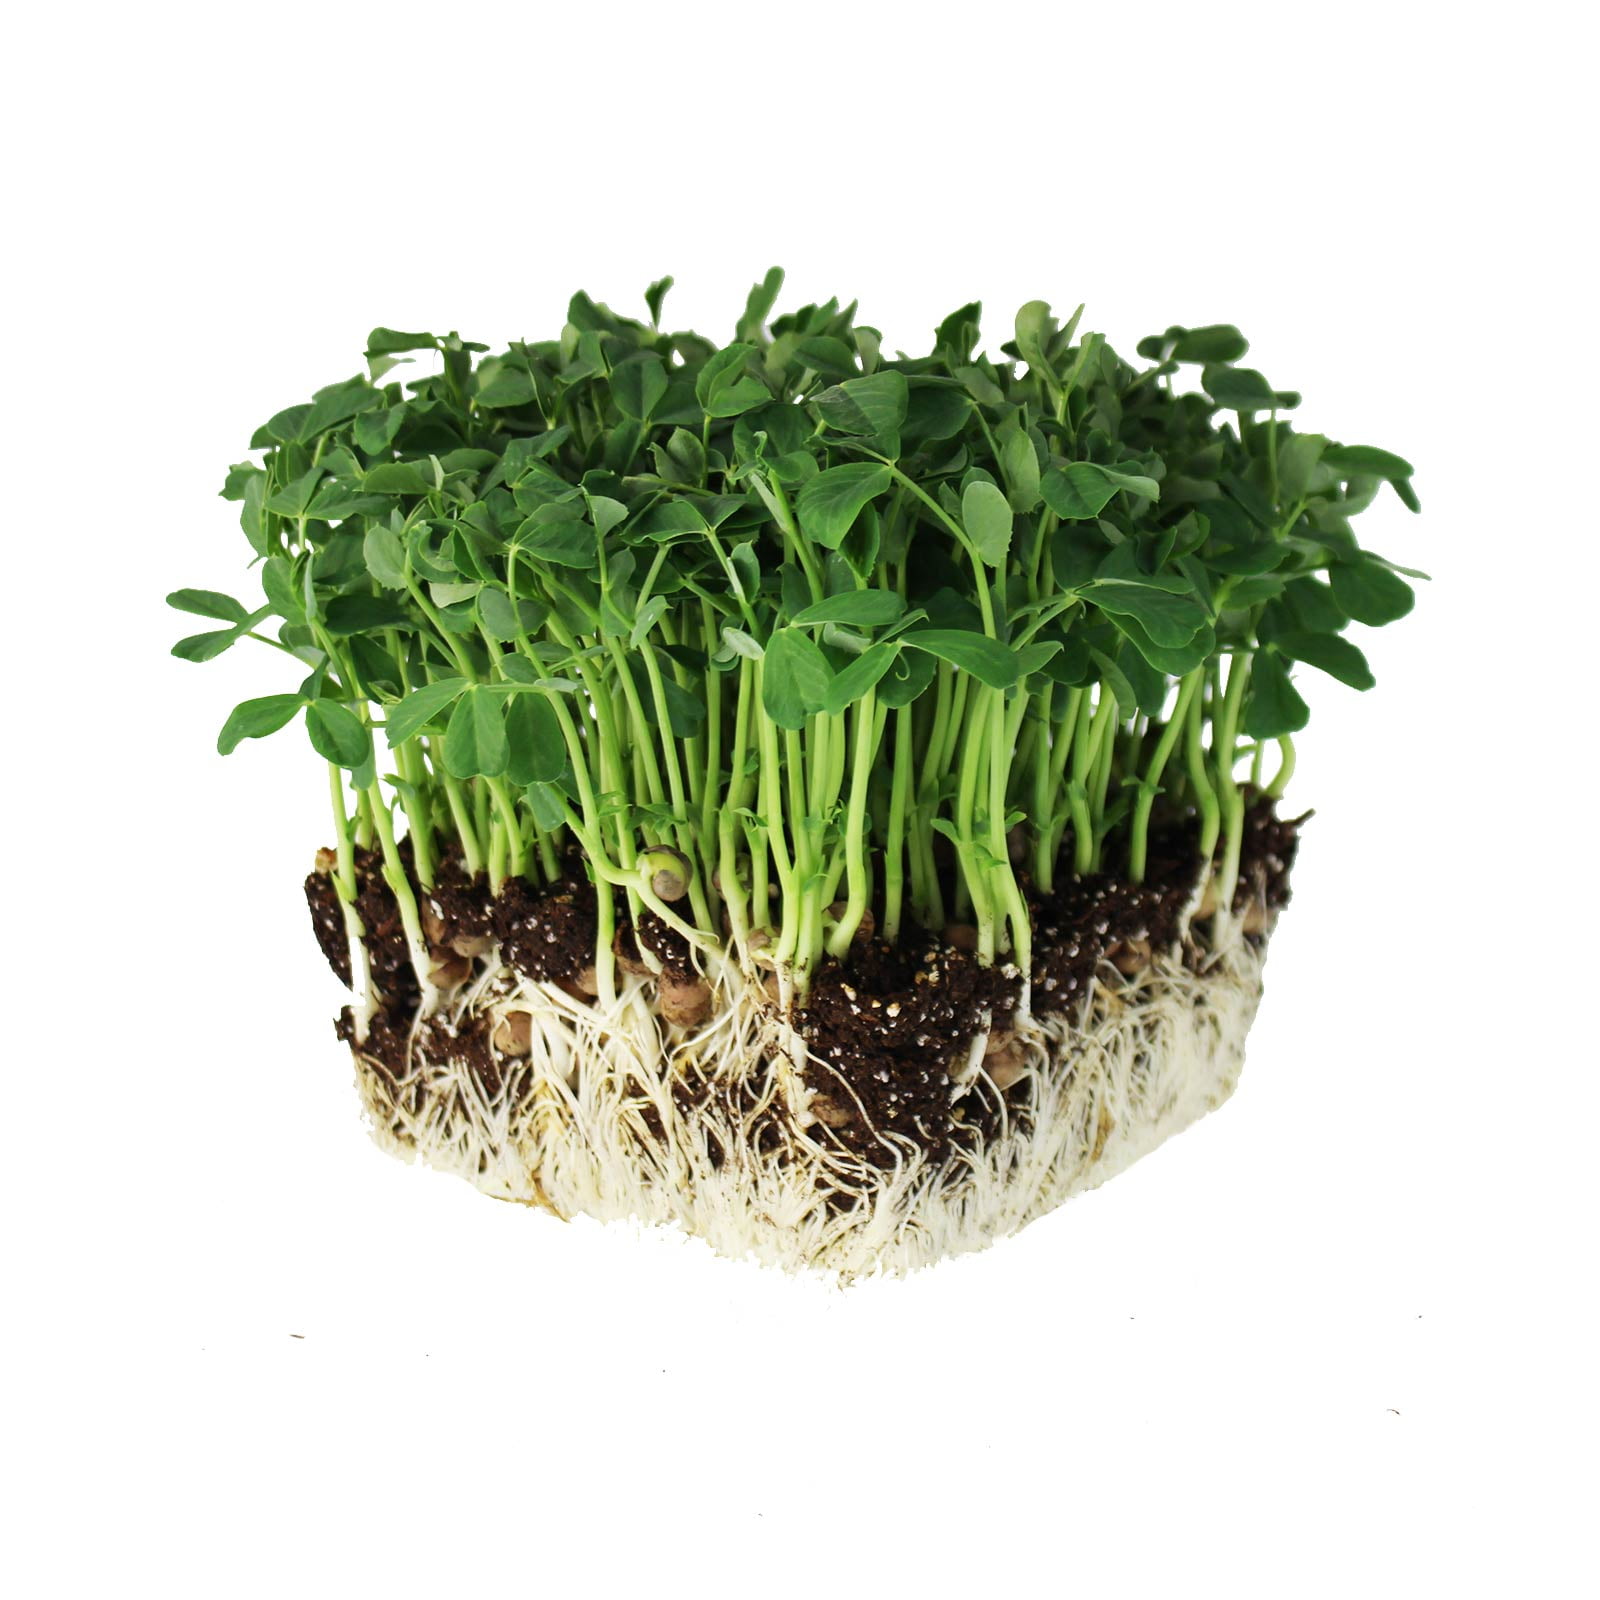 High Germi SEEDELICIOUS Organic Cress Sprouting Seeds Common/Curled 250g Non GMO Healthy Superfood Easy to Sprout